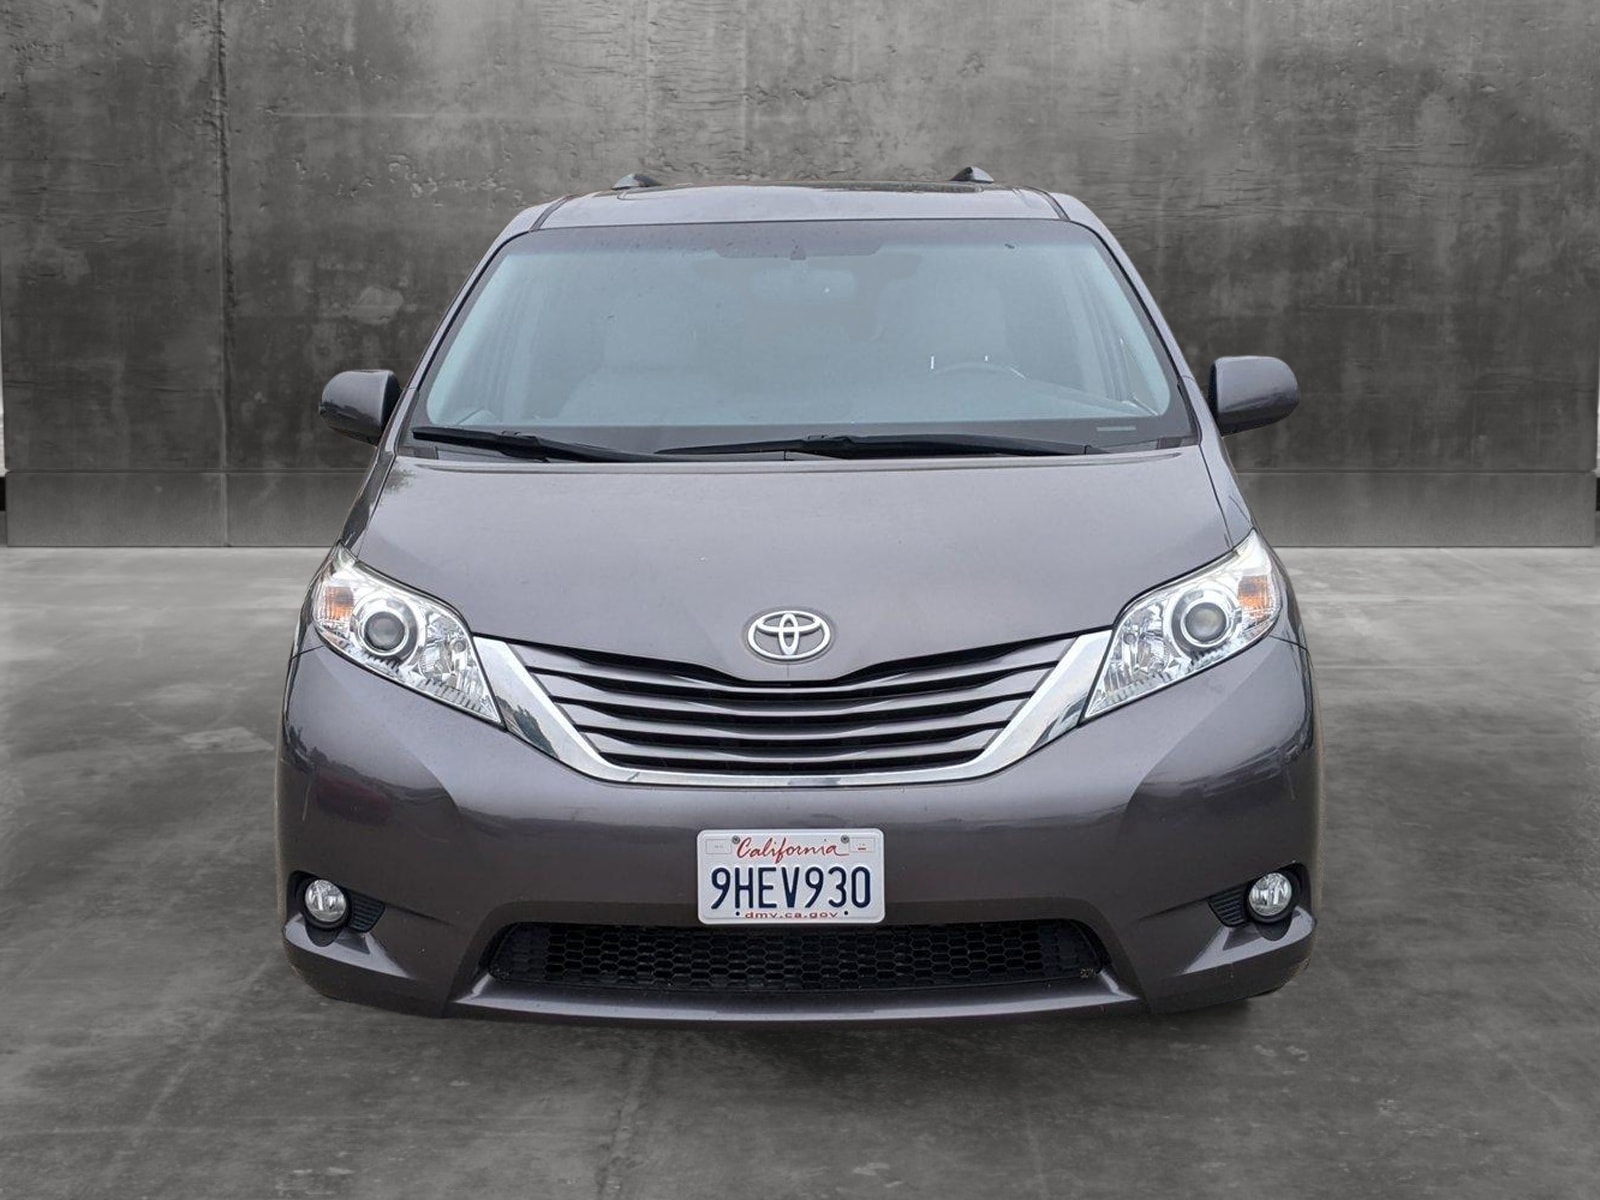 Used 2017 Toyota Sienna XLE Premium with VIN 5TDYZ3DC1HS886742 for sale in Hayward, CA